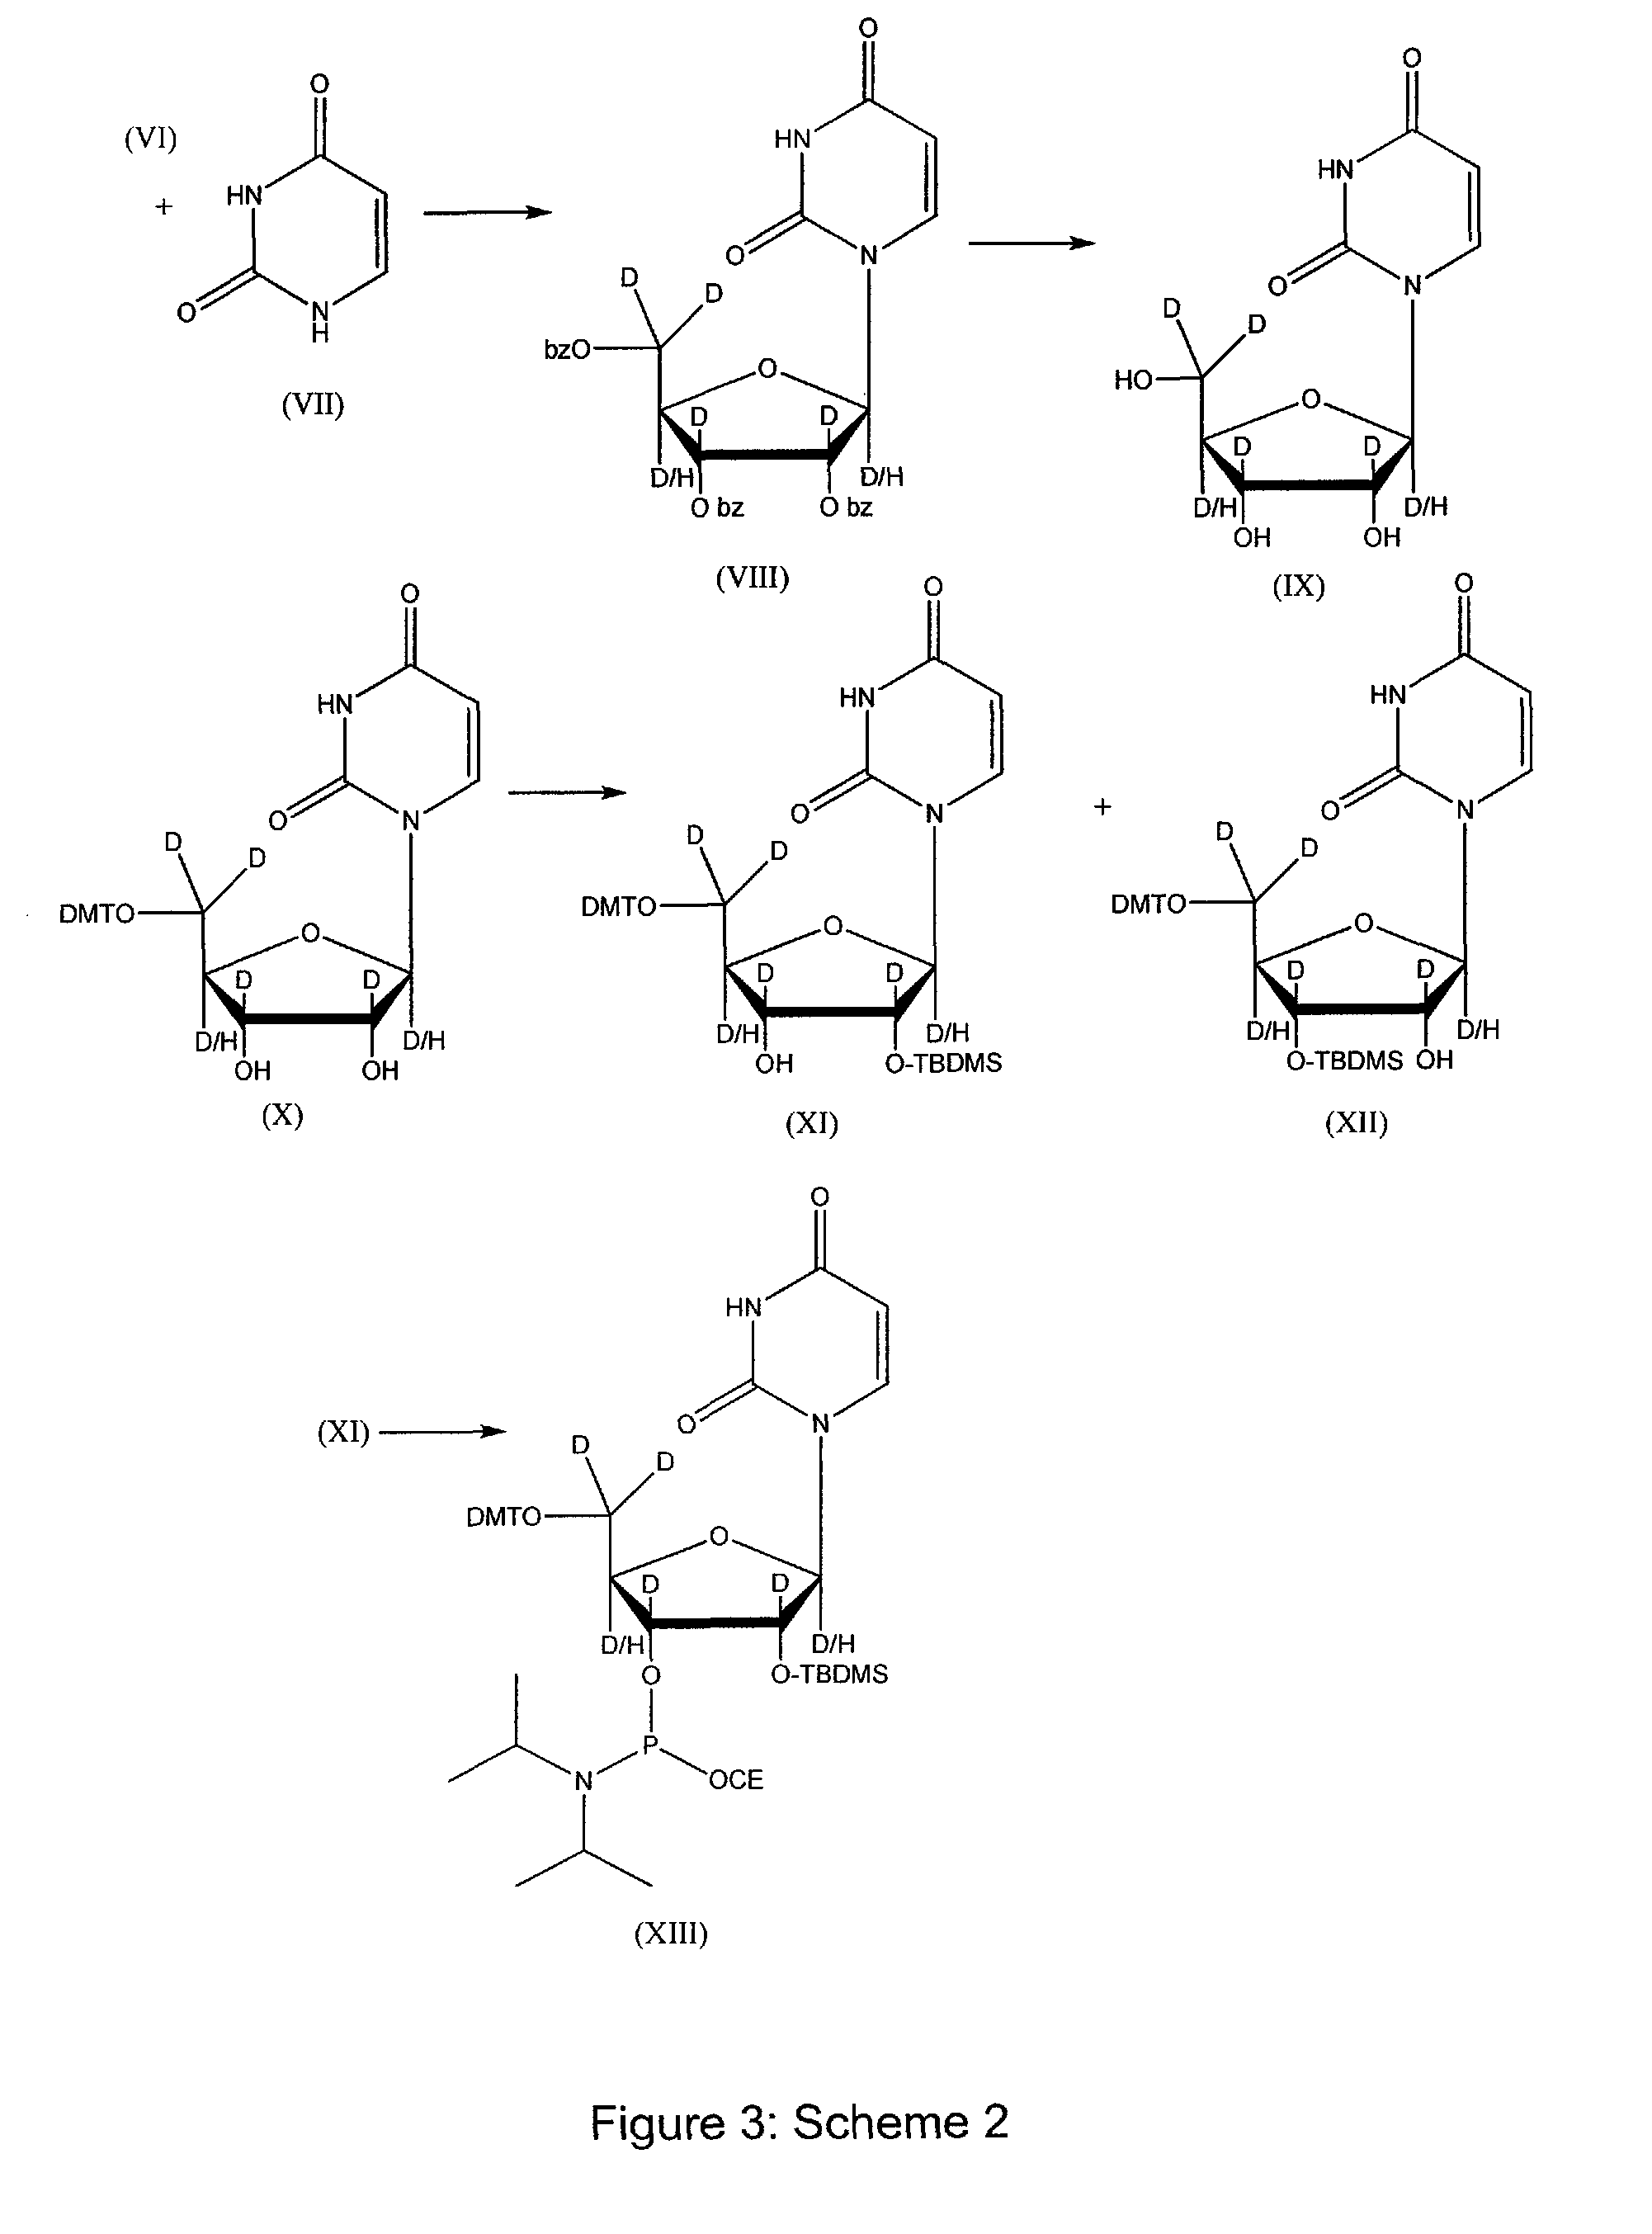 Synthesis of deuterated ribo nucleosides N-protected phosphoramidites, and oligonucleotides